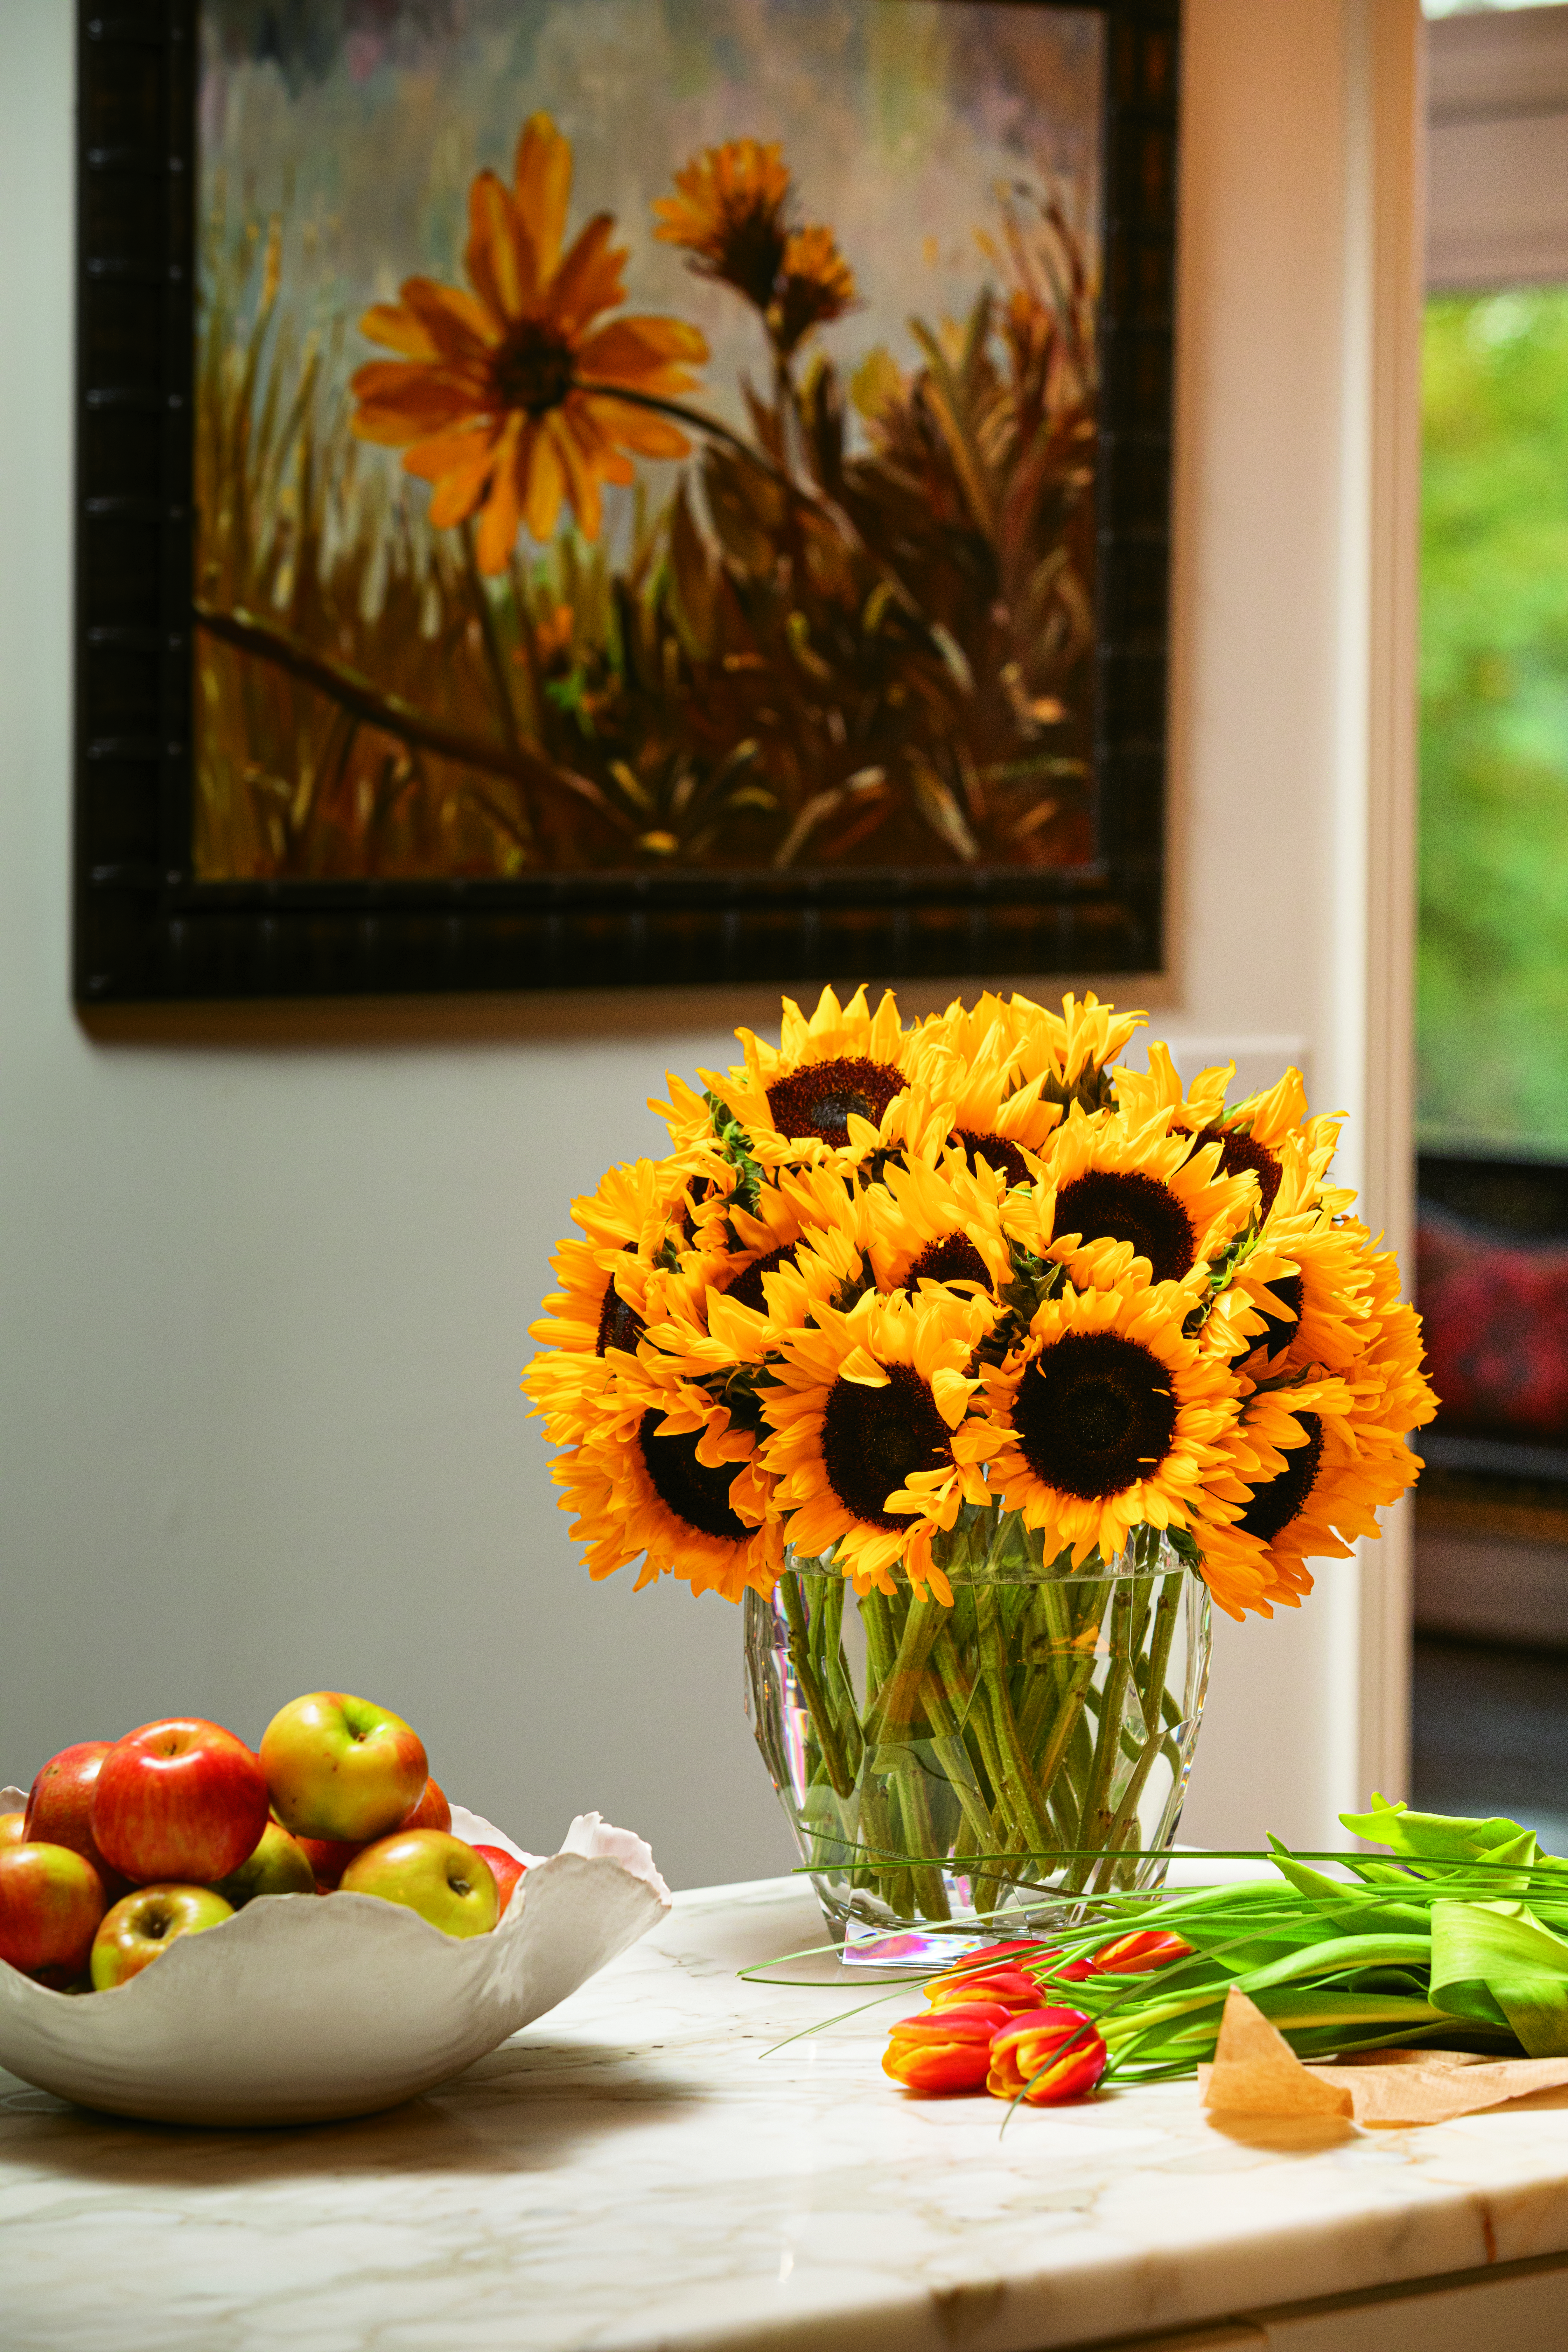 A wide mouthed wine bucket holds five bunches of glorious sunflowers. To build your arrangement, place the flowers one at a time around the rim of the vase in a spiraling fashion until you reach the top of the mound. Flowers courtesy of Trader Joe’s.